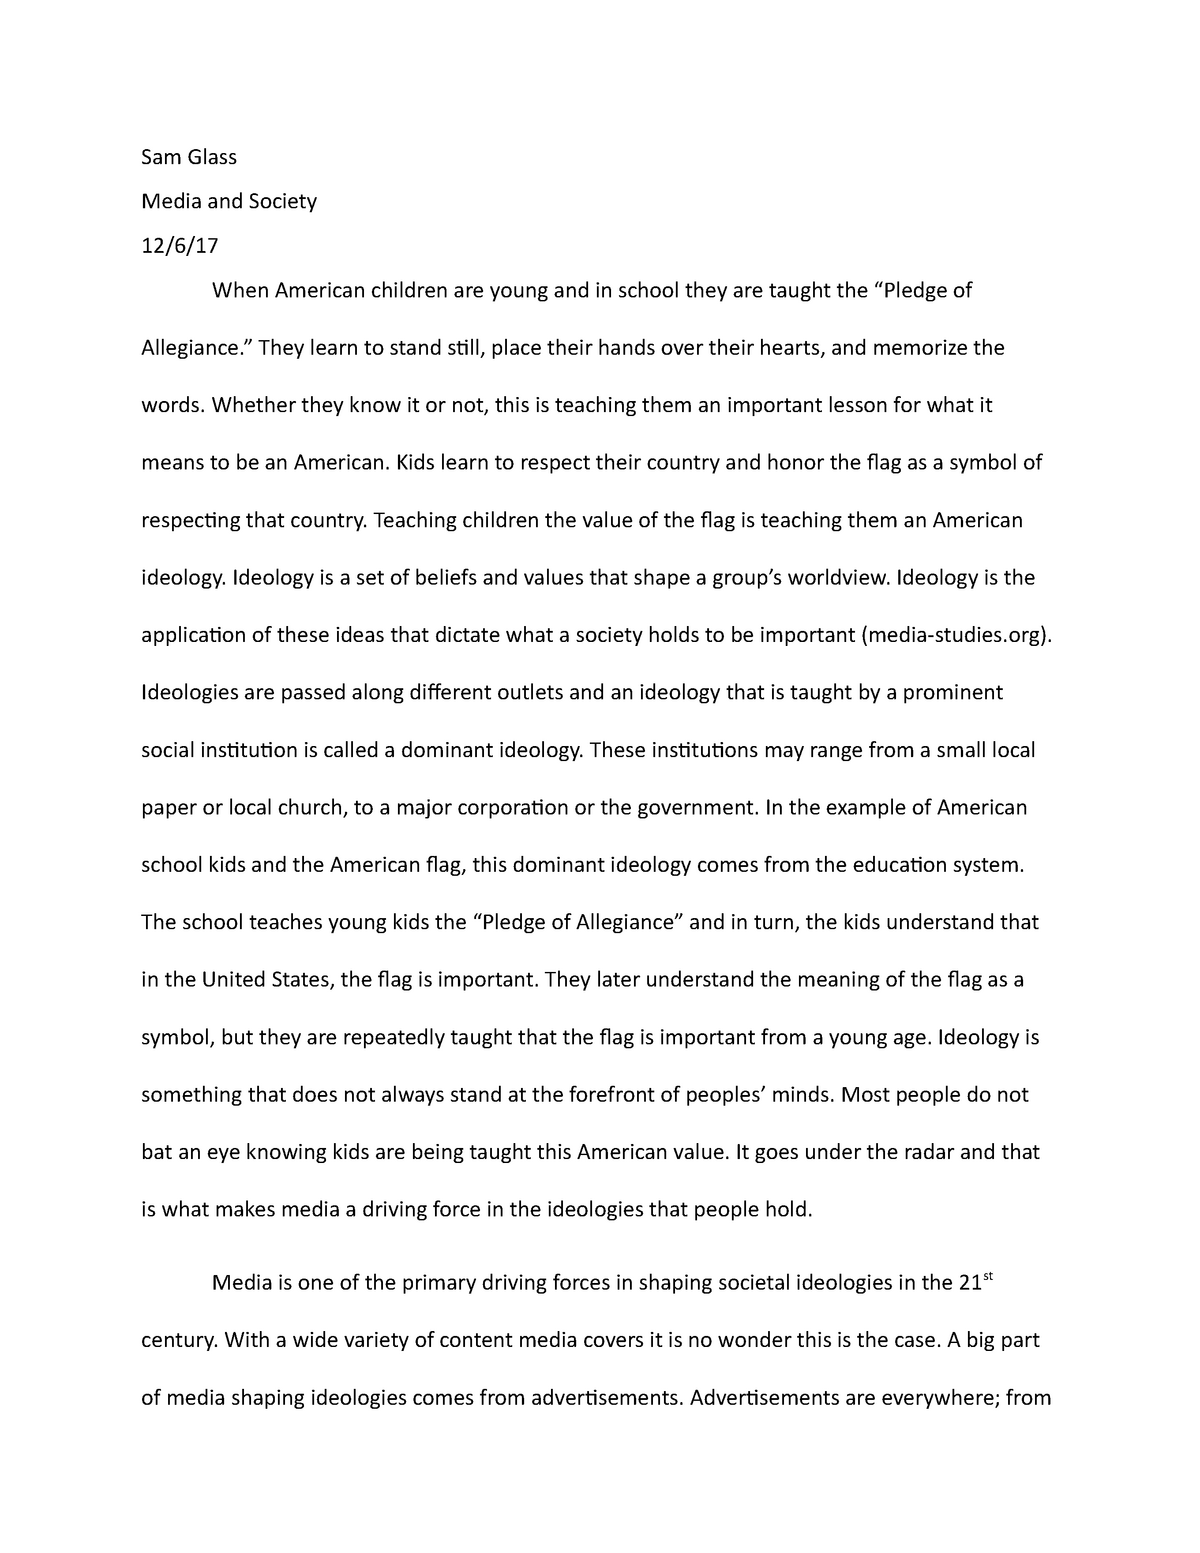 essay on world cup cricket